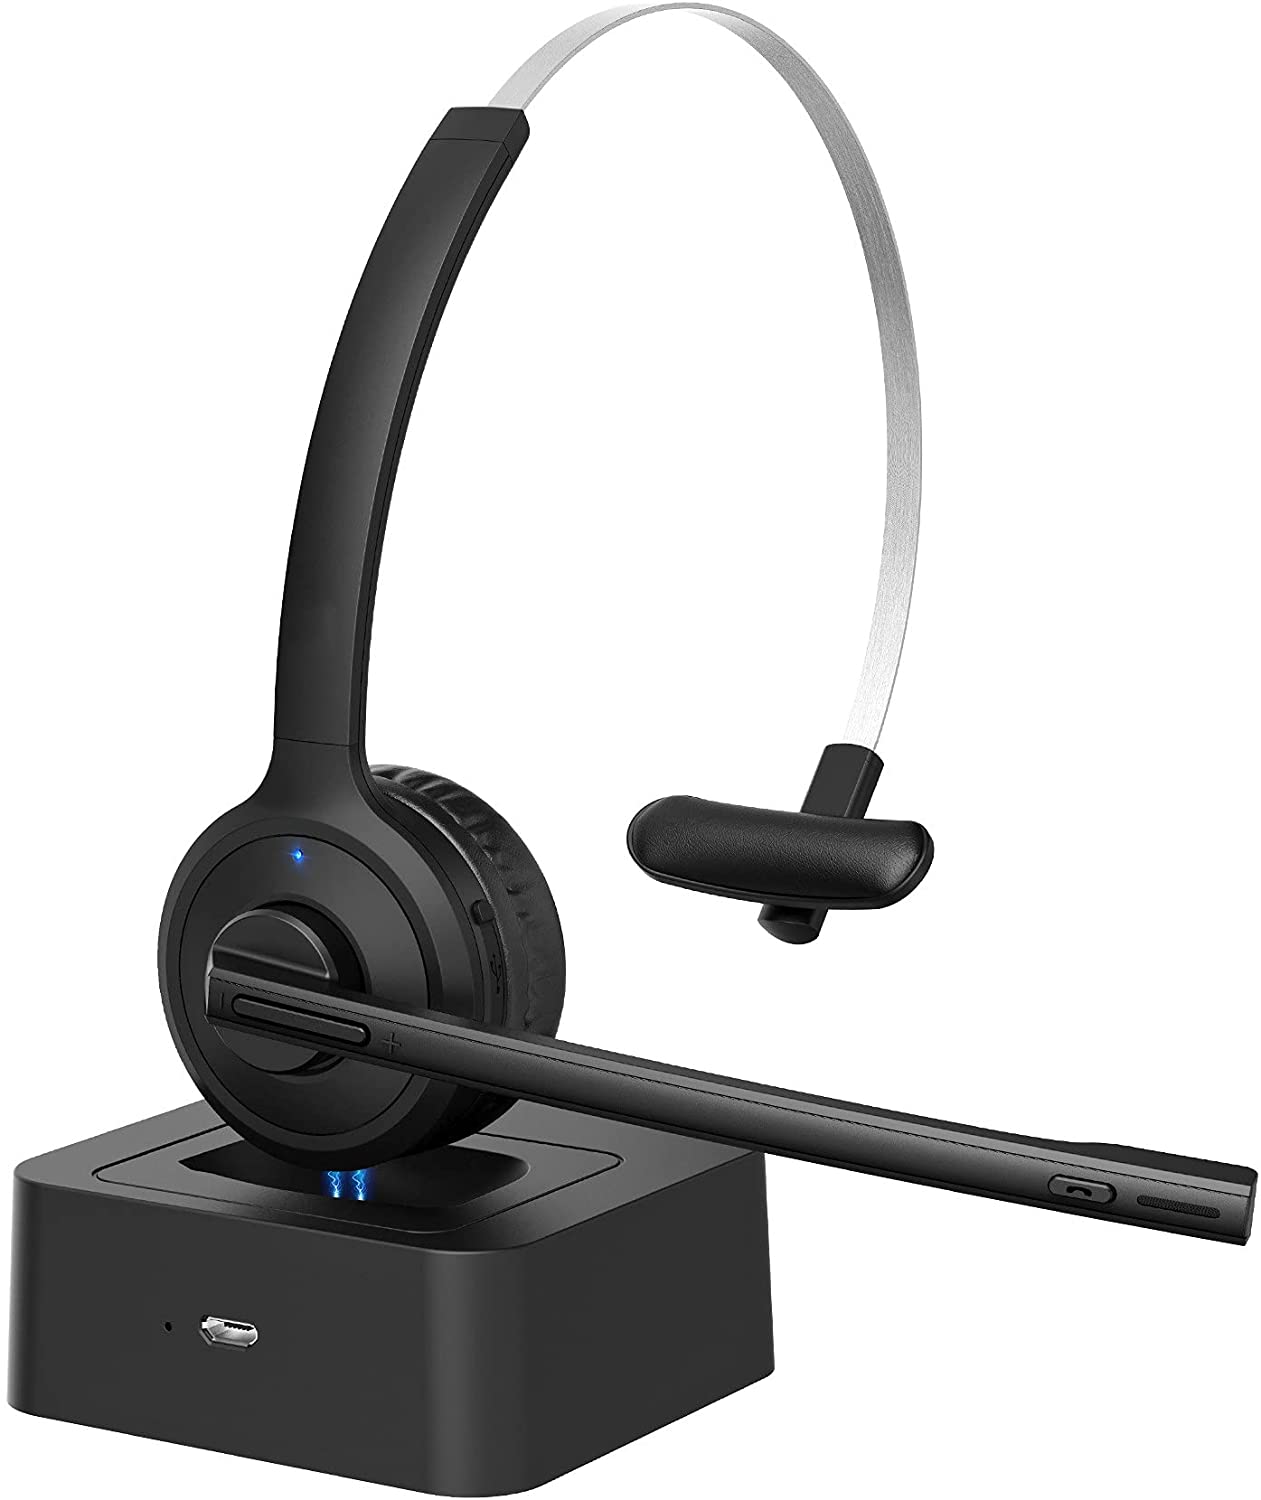 ''Wireless Headset with Charging Base, Wireless PC HEADPHONES with Noise Cancelling Microphone,Truck 